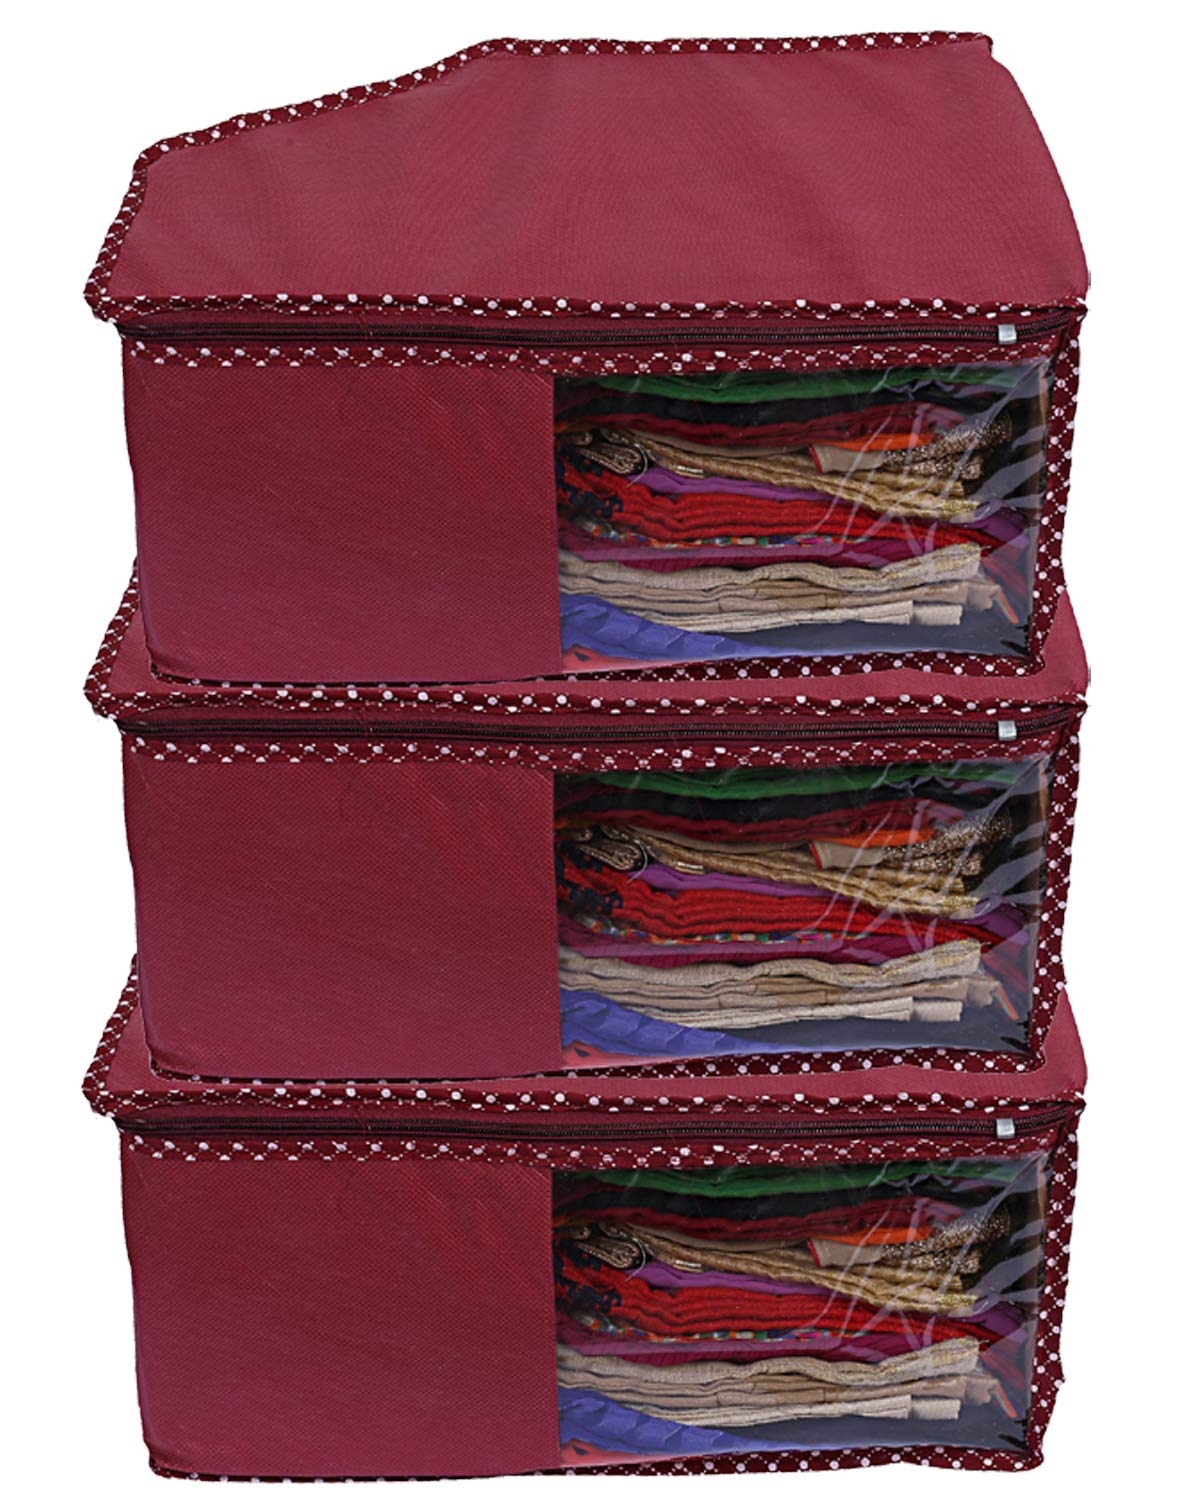 Kuber Industries Non Woven Blouse Cover Bag|Cloth Organizer|Clothes bags for Storage Clothes|Pack of 3 (Maroon)